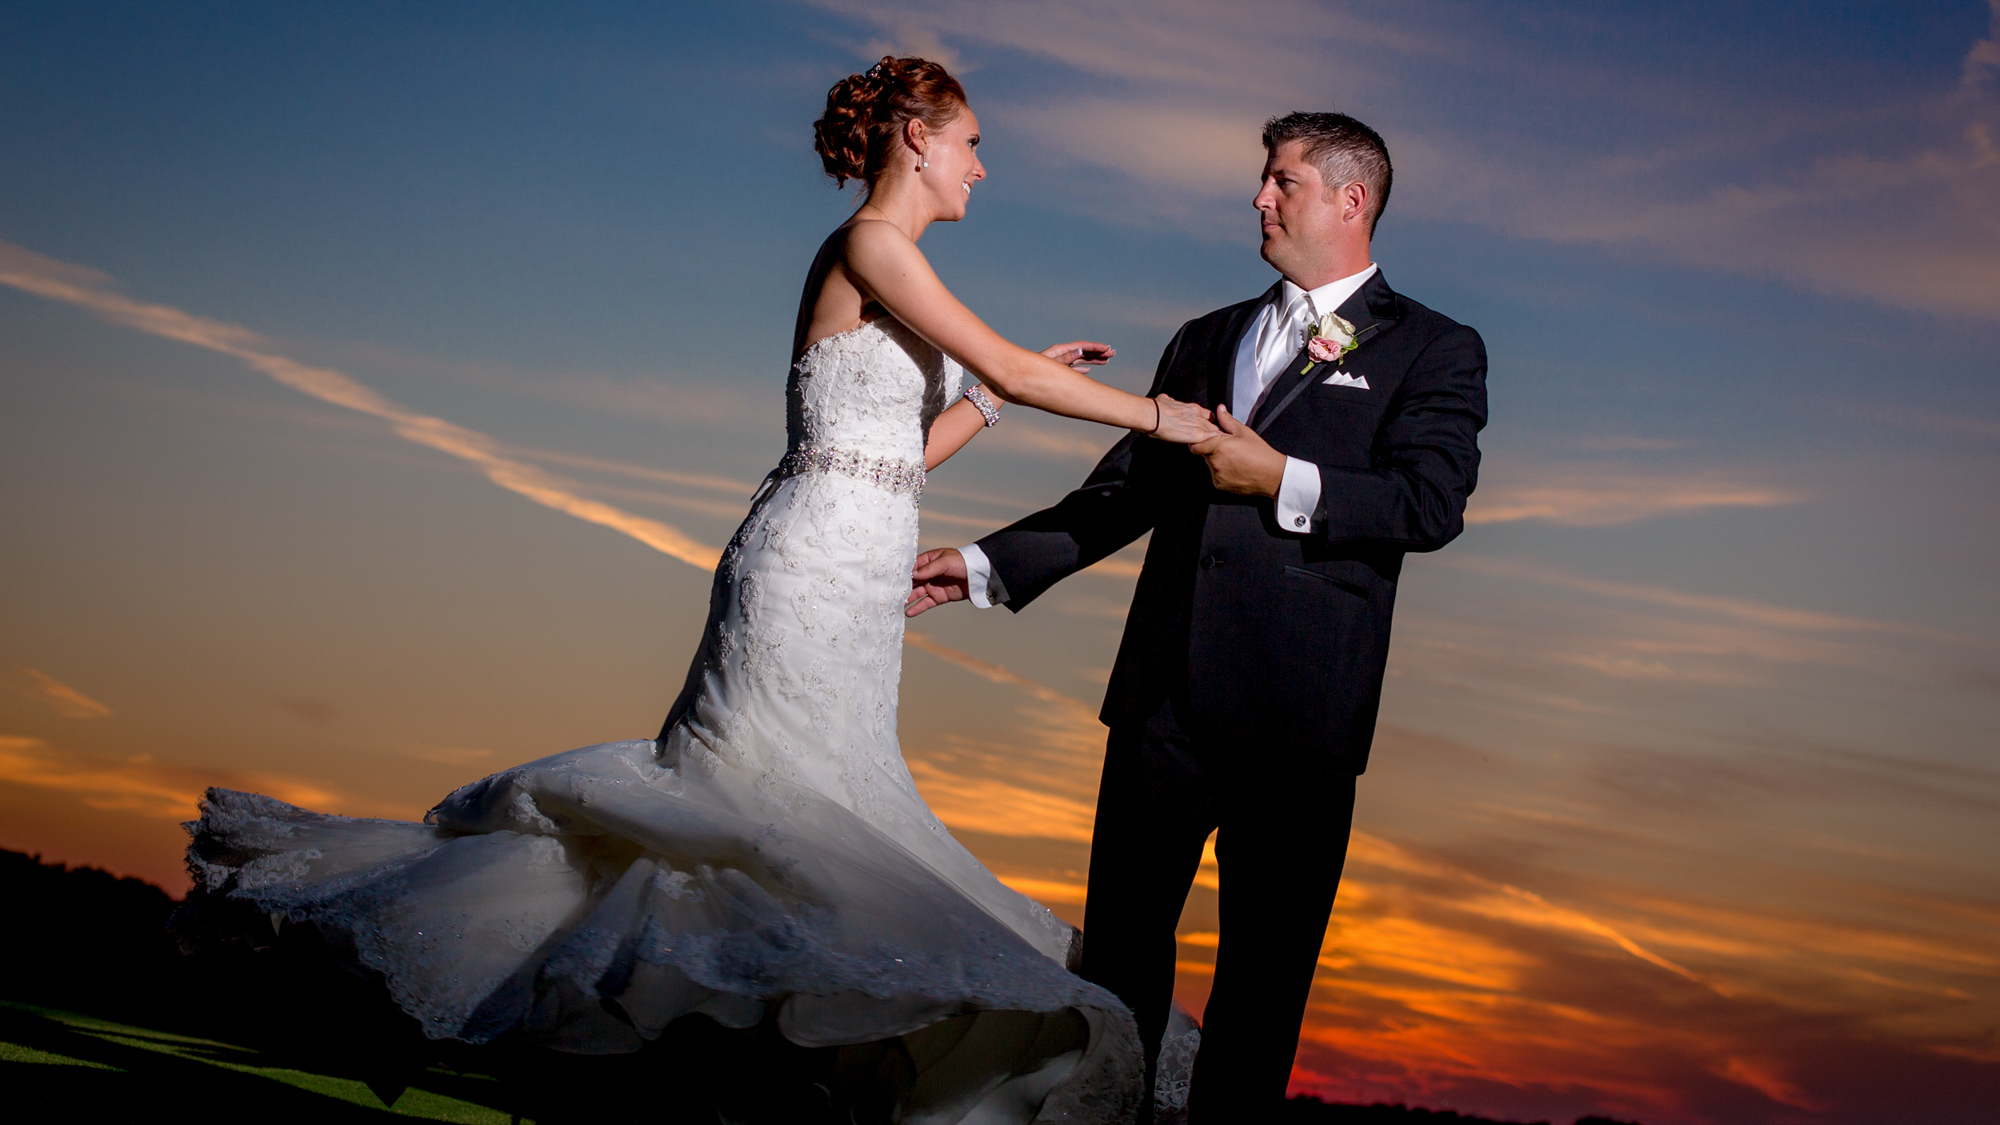 Dallas wedding video still frame of a groom spinning his bride in the sunset.